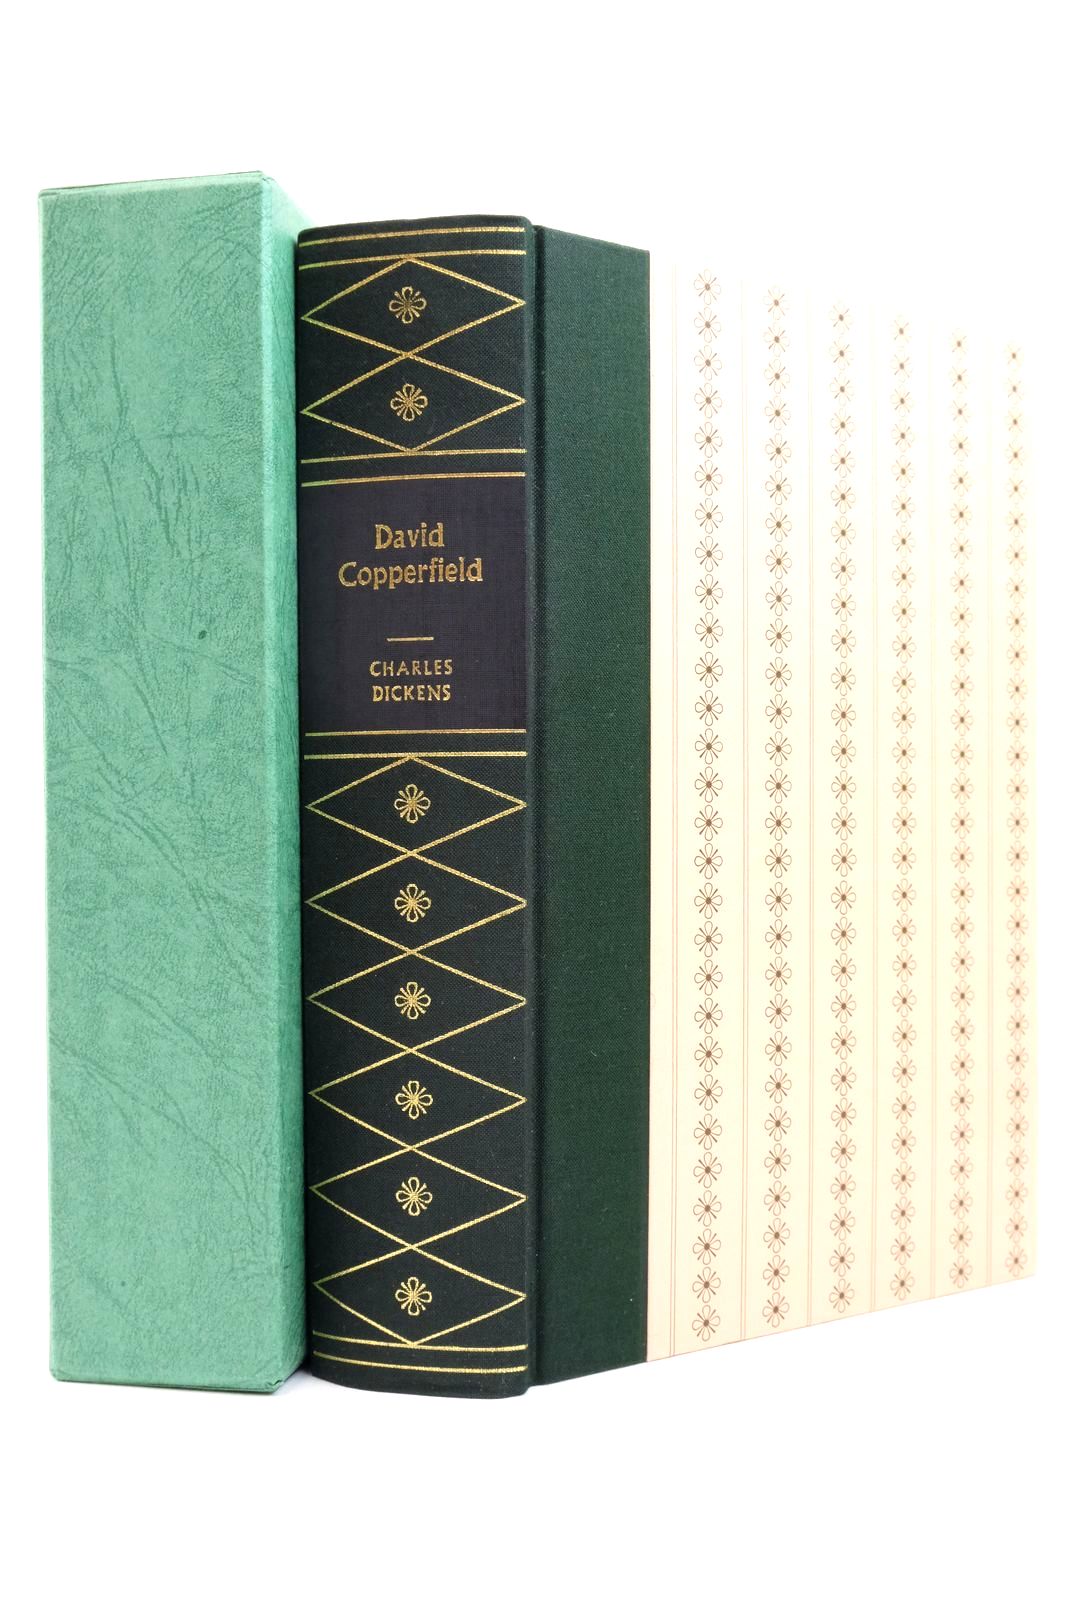 Photo of DAVID COPPERFIELD written by Dickens, Charles illustrated by Keeping, Charles published by Folio Society (STOCK CODE: 2138515)  for sale by Stella & Rose's Books